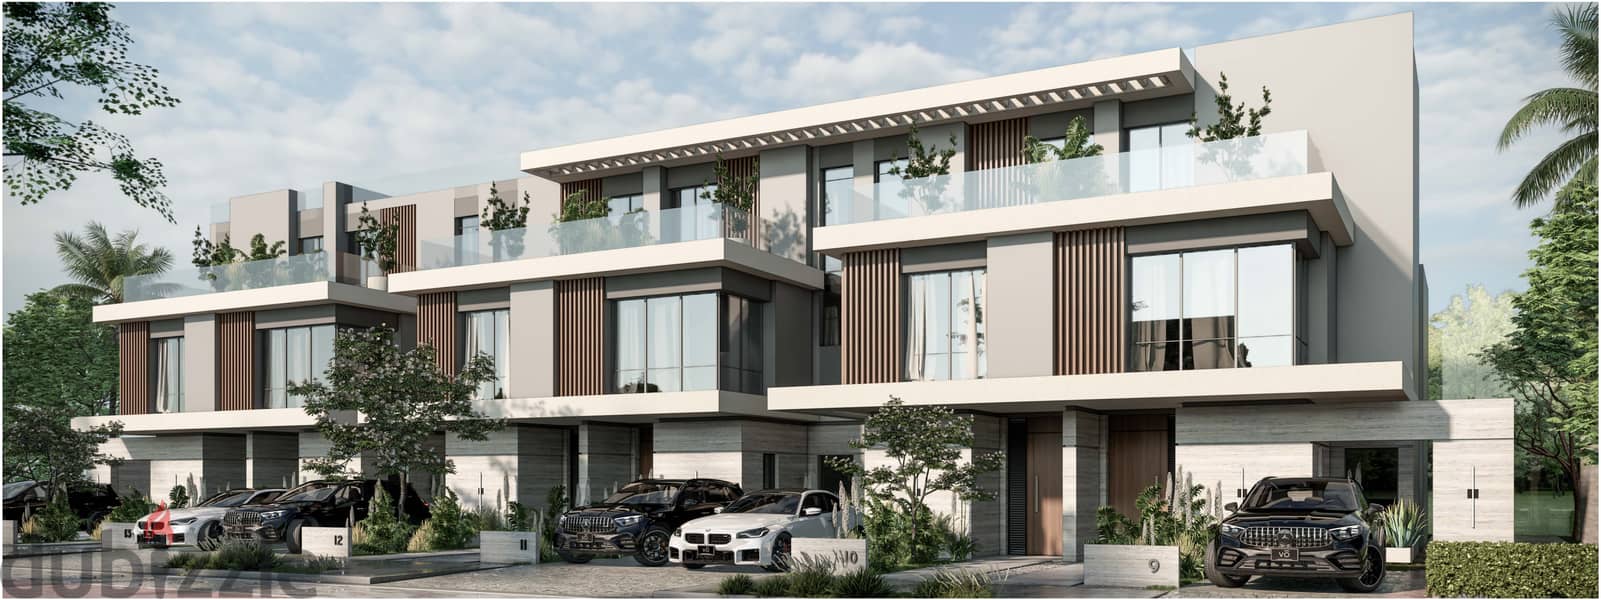 Special Offer: Own a Fully Finished Independent Villa at the Price of an Apartment in the Heart of Future City in Red Compound near the Airport  pen_s 3